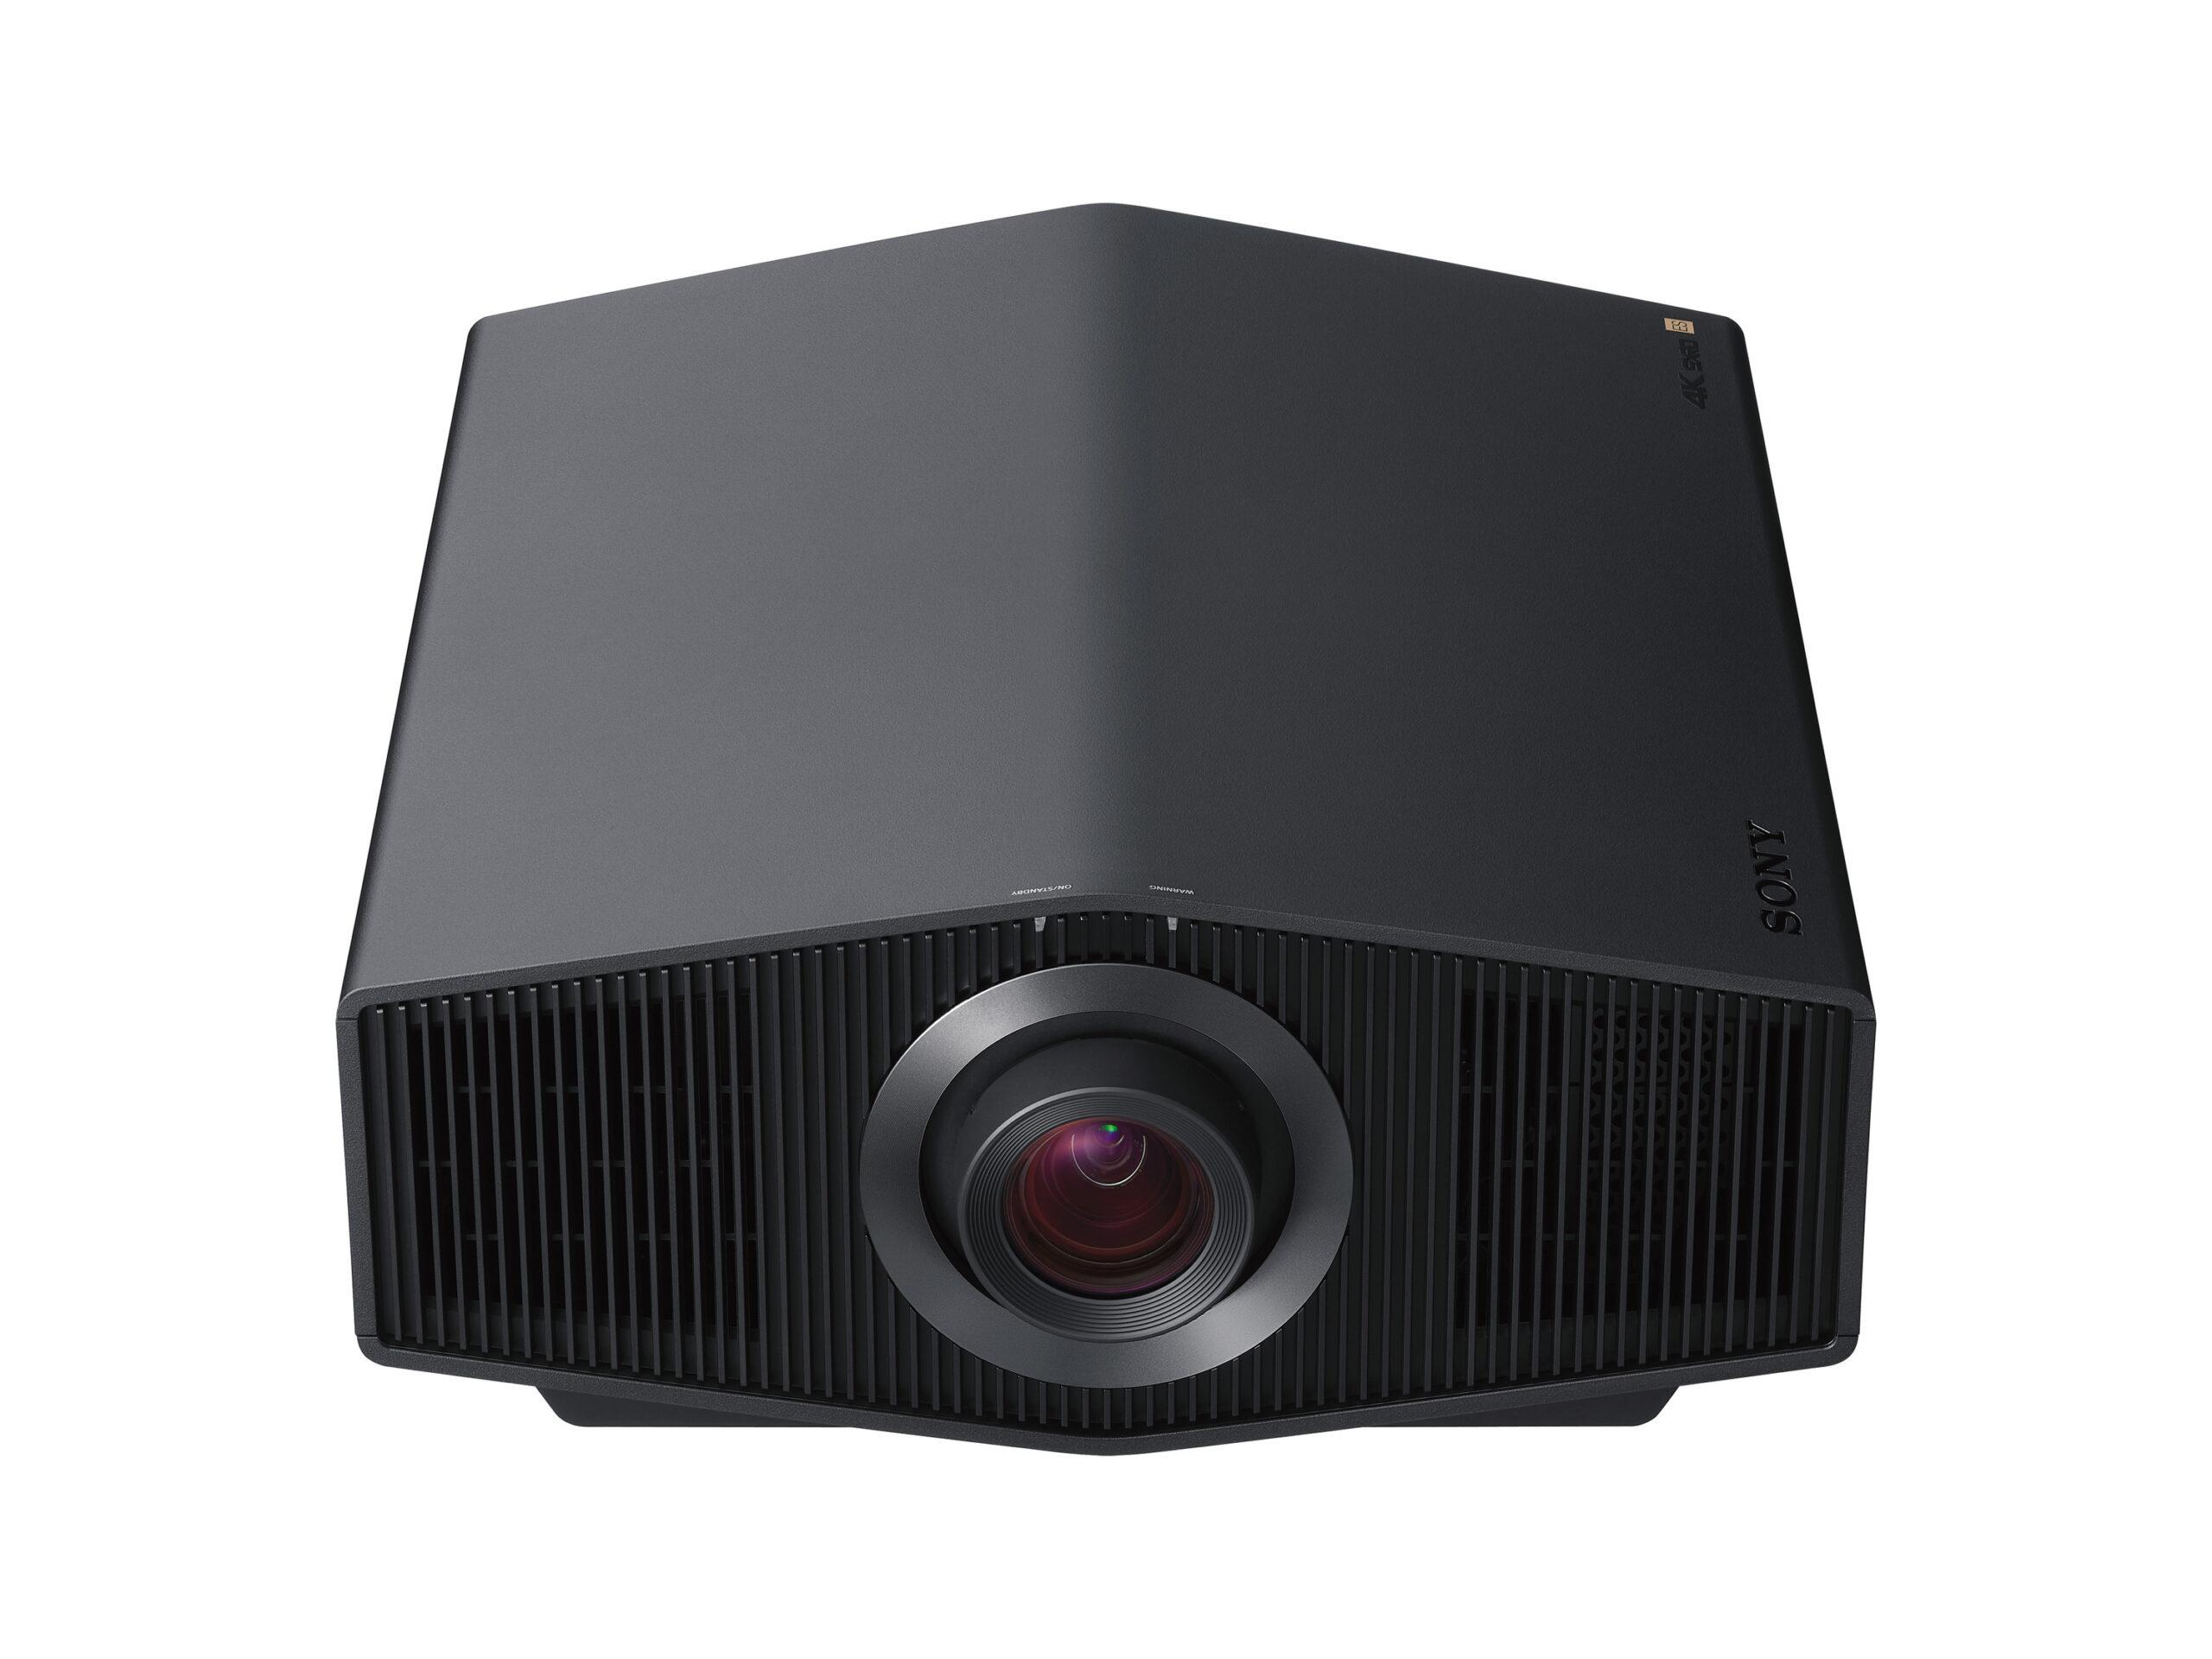 This is no mere annual refresh. Sony's three new home theater projectors are a generational leap forward. e355ba4d vplxw7000 others 220201 06 large scaled